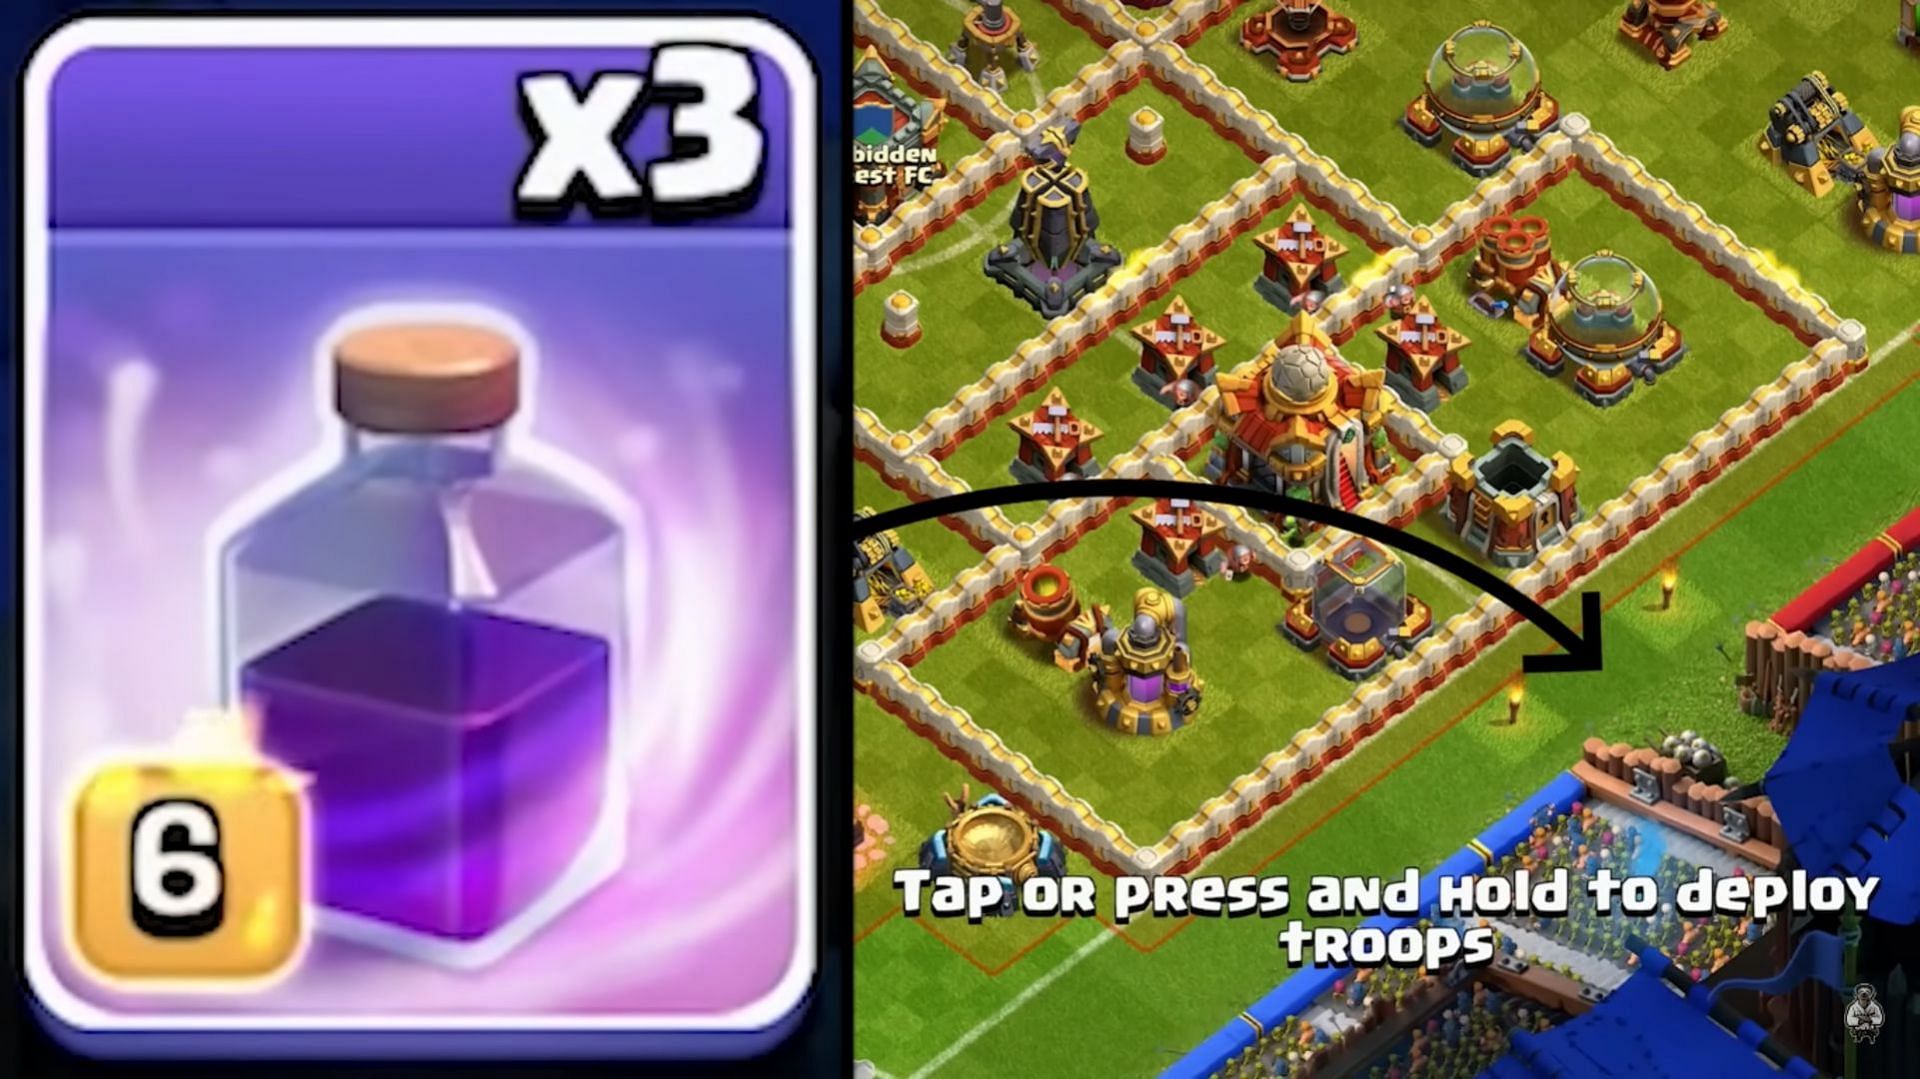 Rage Spell usage (Image via Supercell)